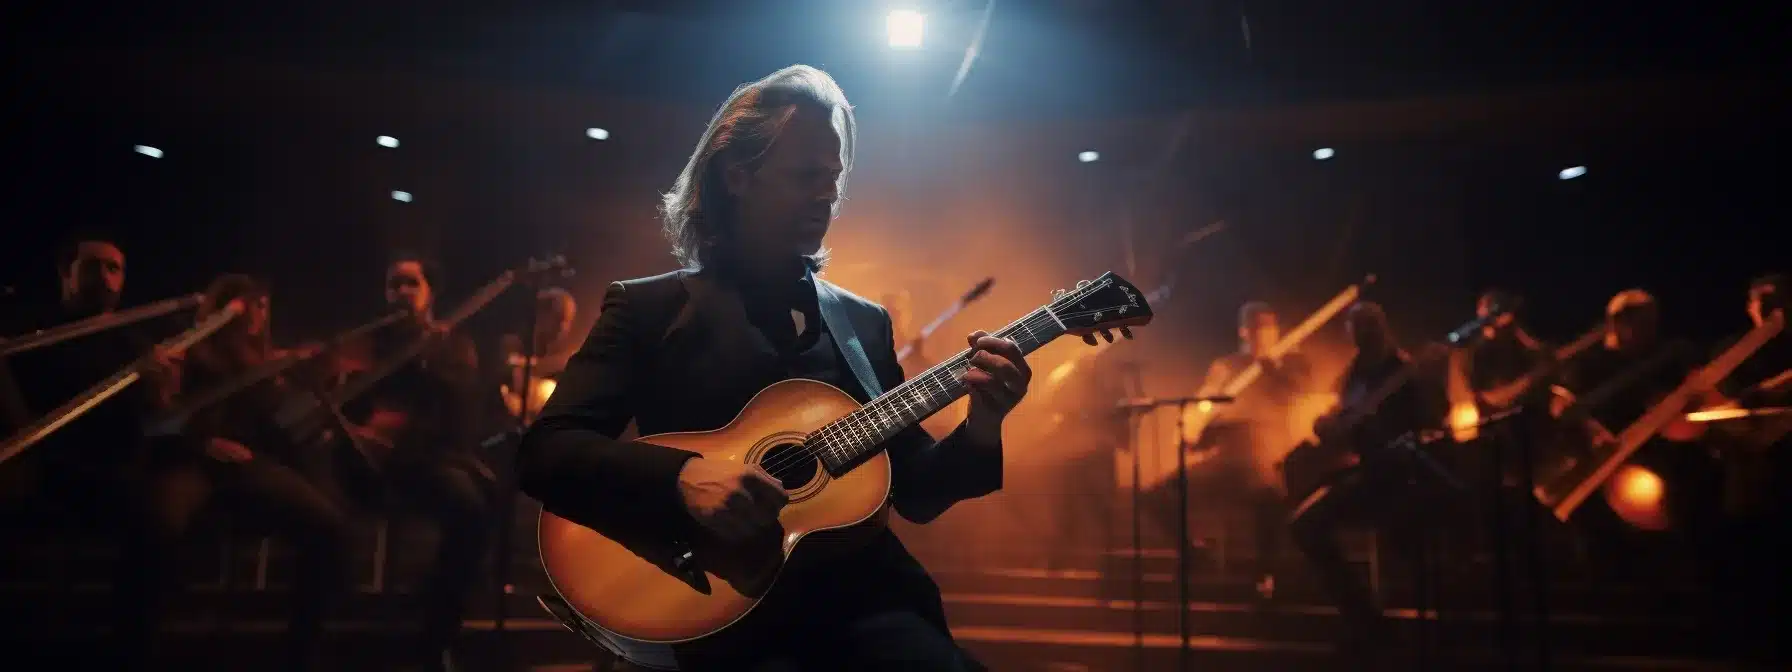 A Brand Manager Conducting A Symphony Orchestra With A Well-Tuned Guitar As The Lead Instrument.